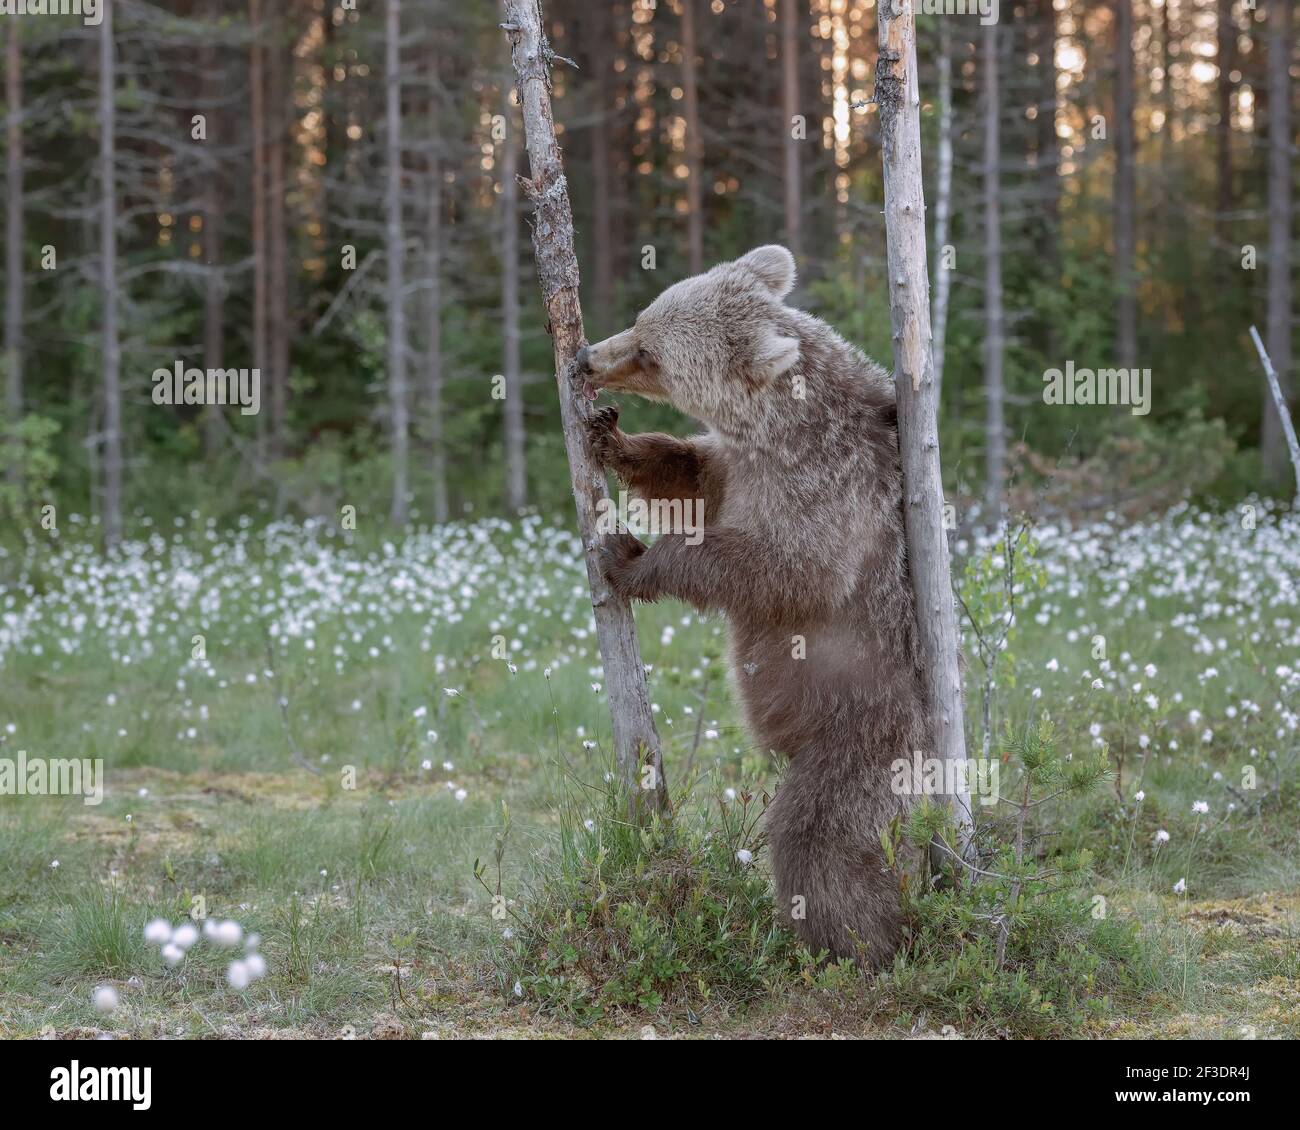 A brown bear standing on his hind legs licking honey Stock Photo